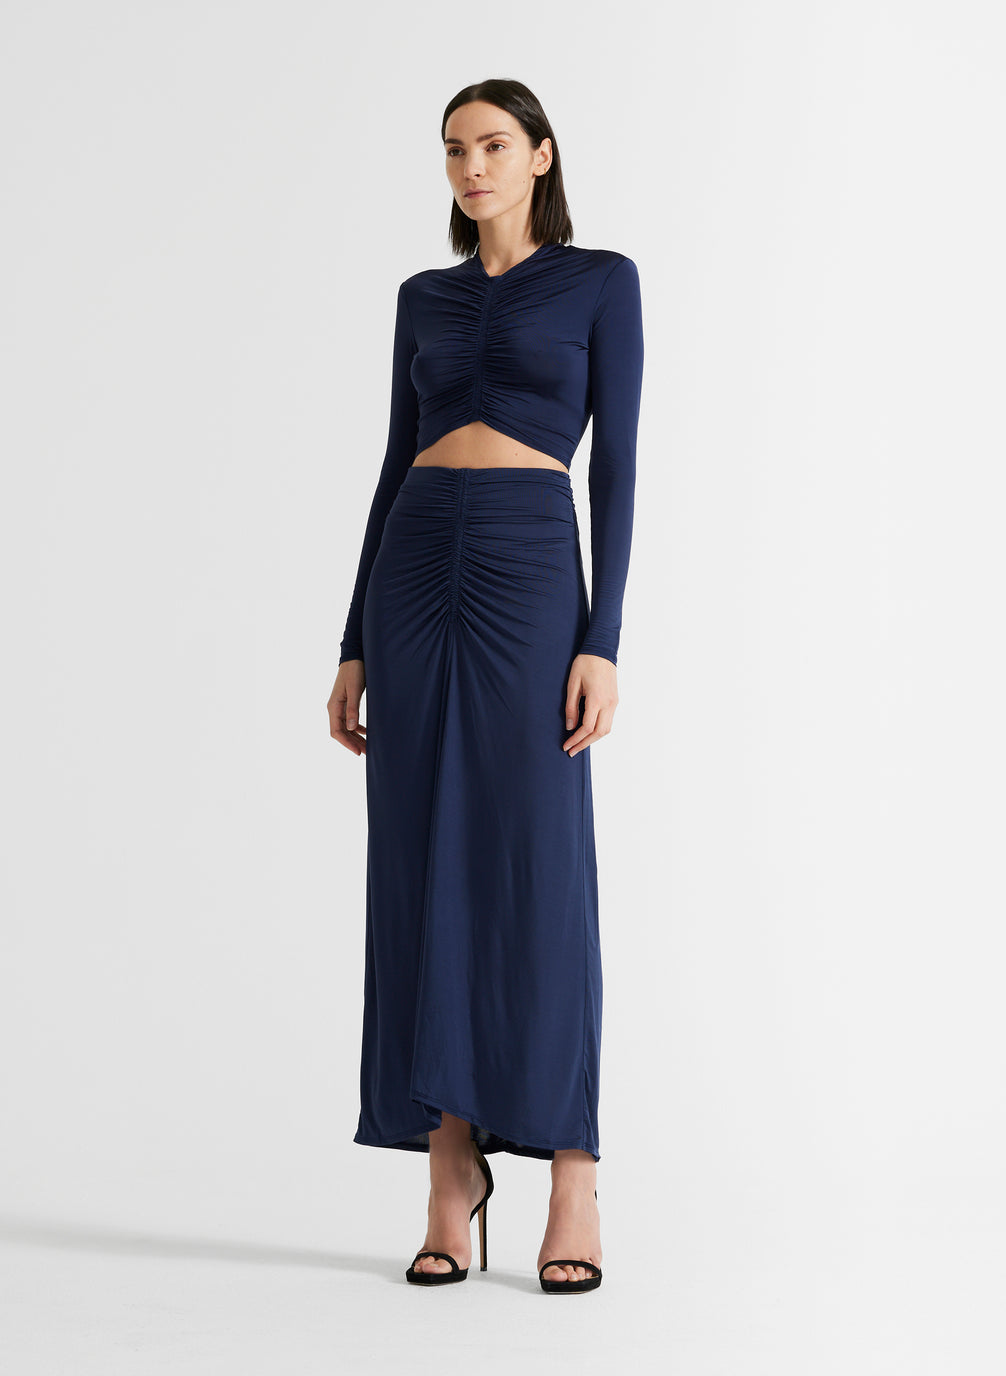 side view of woman in navy blue ruched crop top and matching navy blue maxi skirt